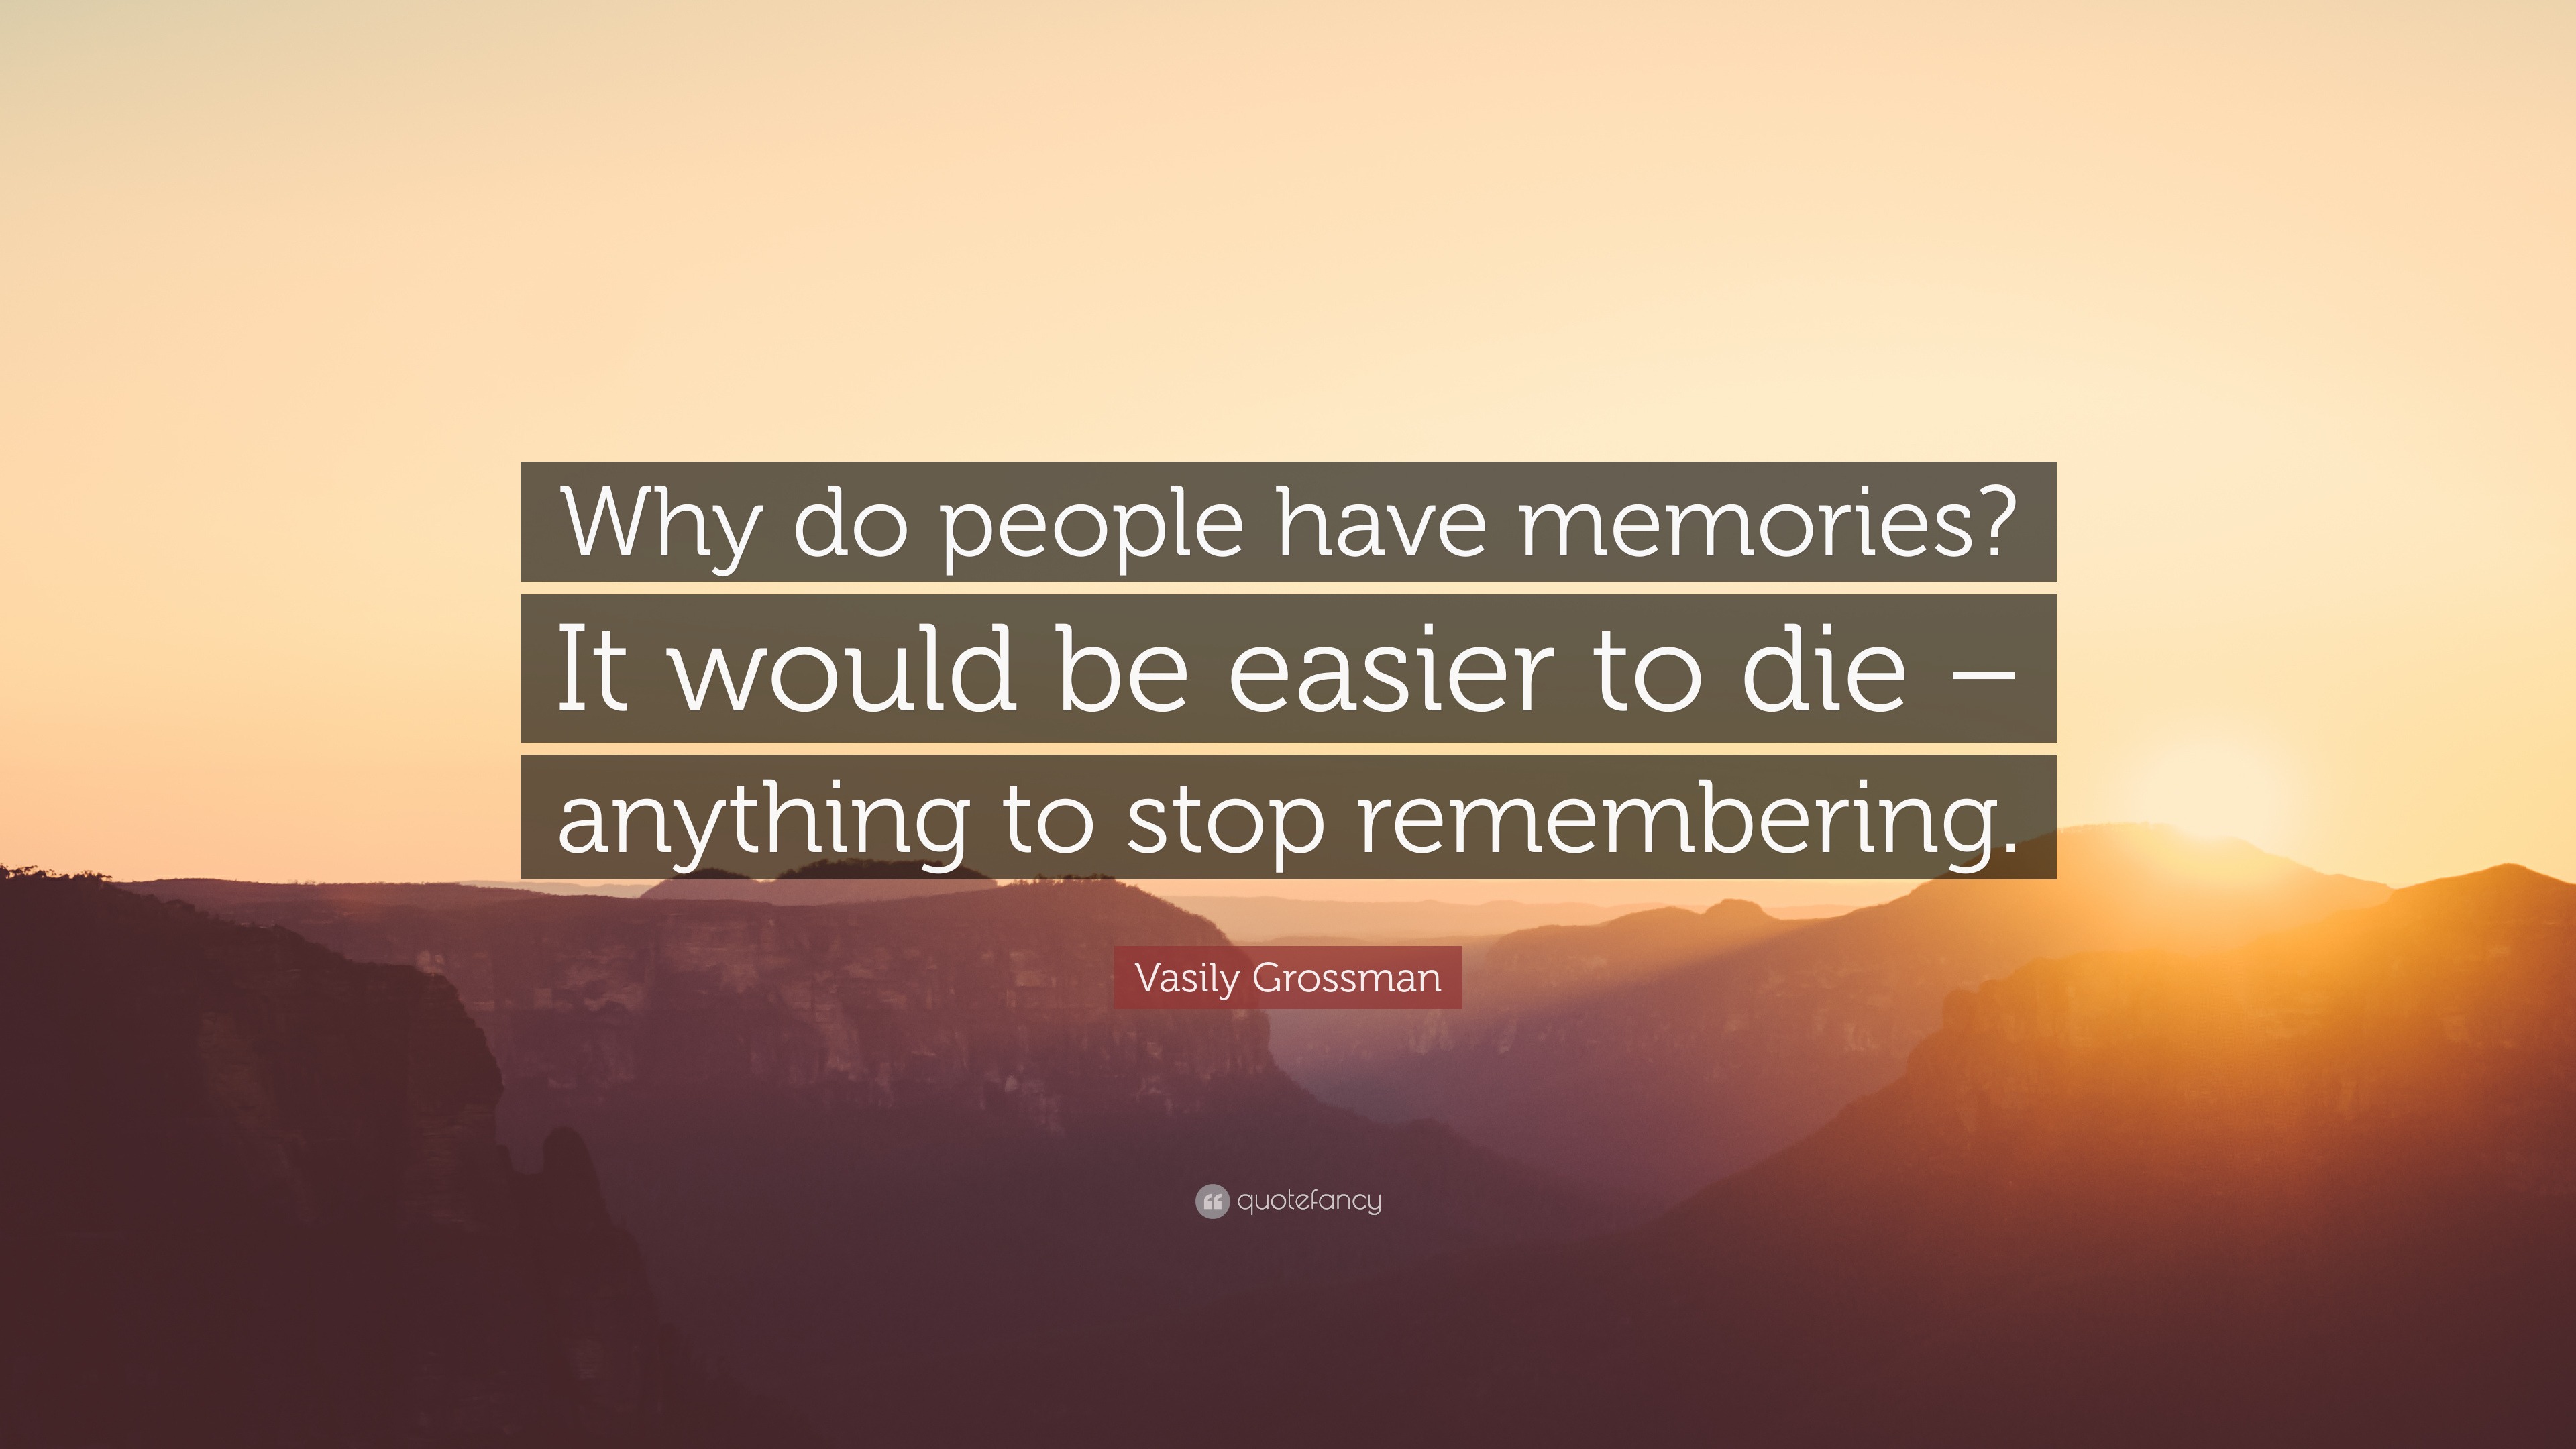 Vasily Grossman Quote: “Why do people have memories? It would be easier ...